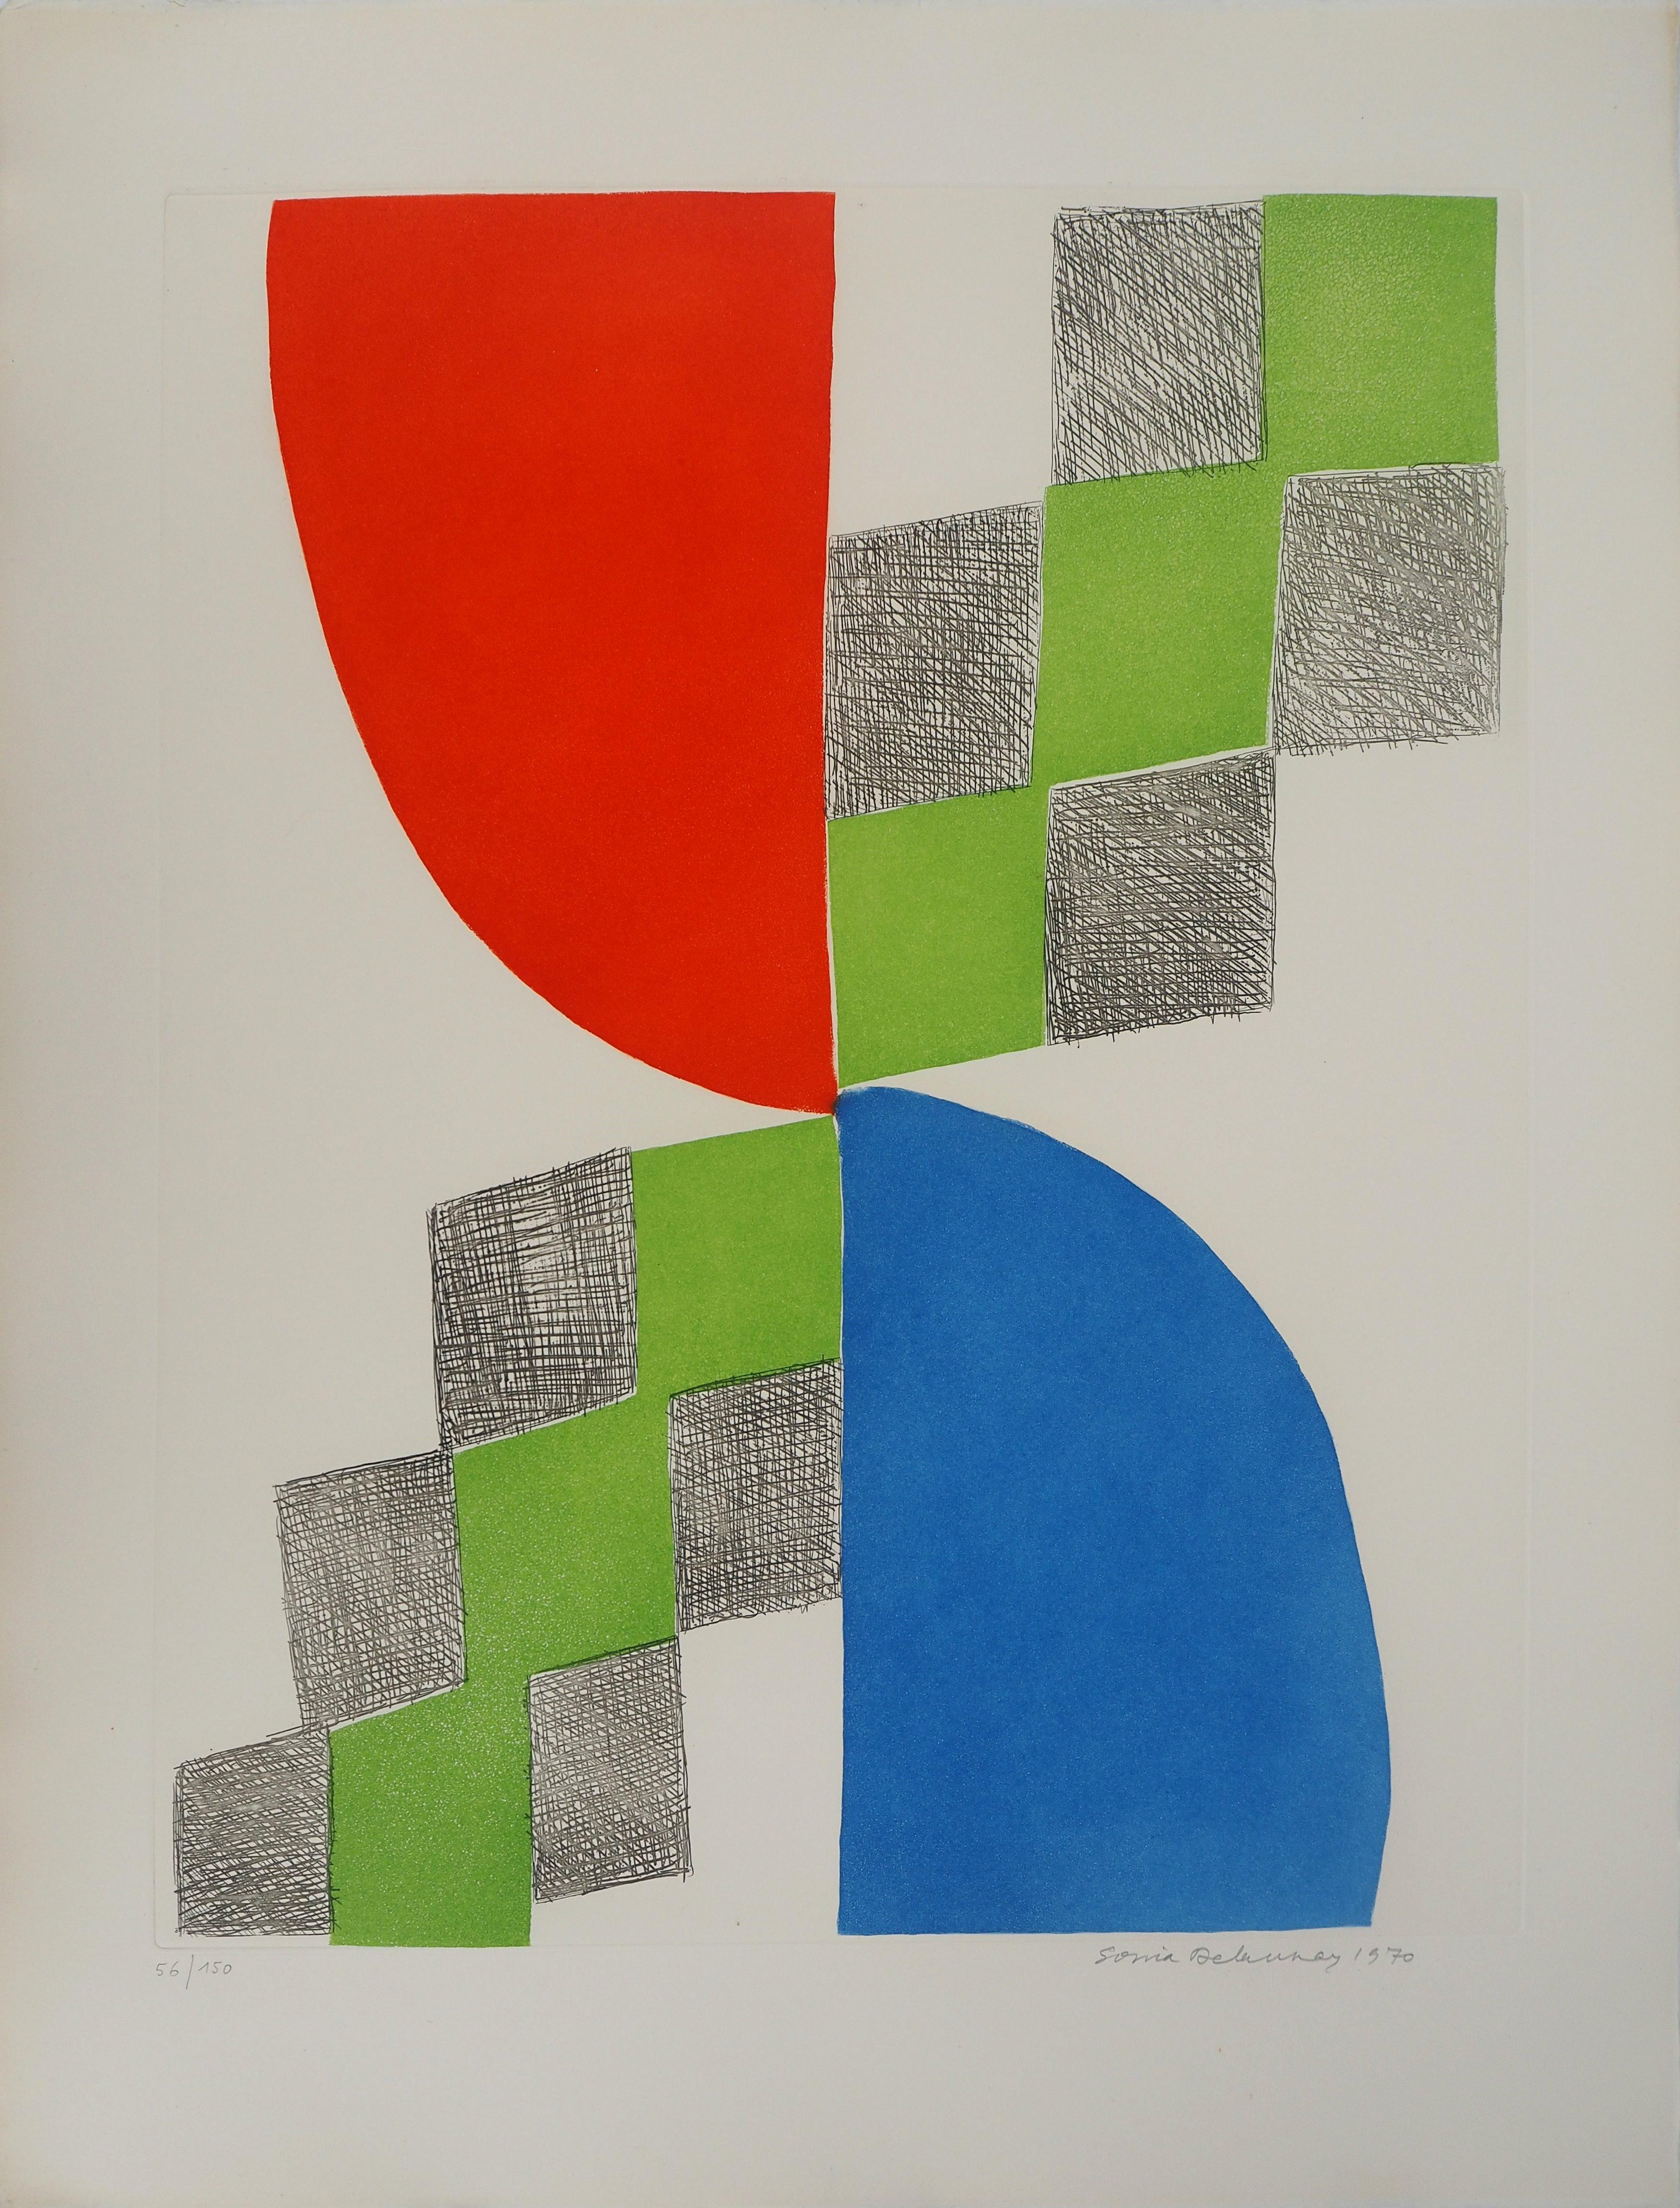 Sonia Delaunay Abstract Print - Composition 1970 - Original etching - Signed in pencil & Numbered / 150